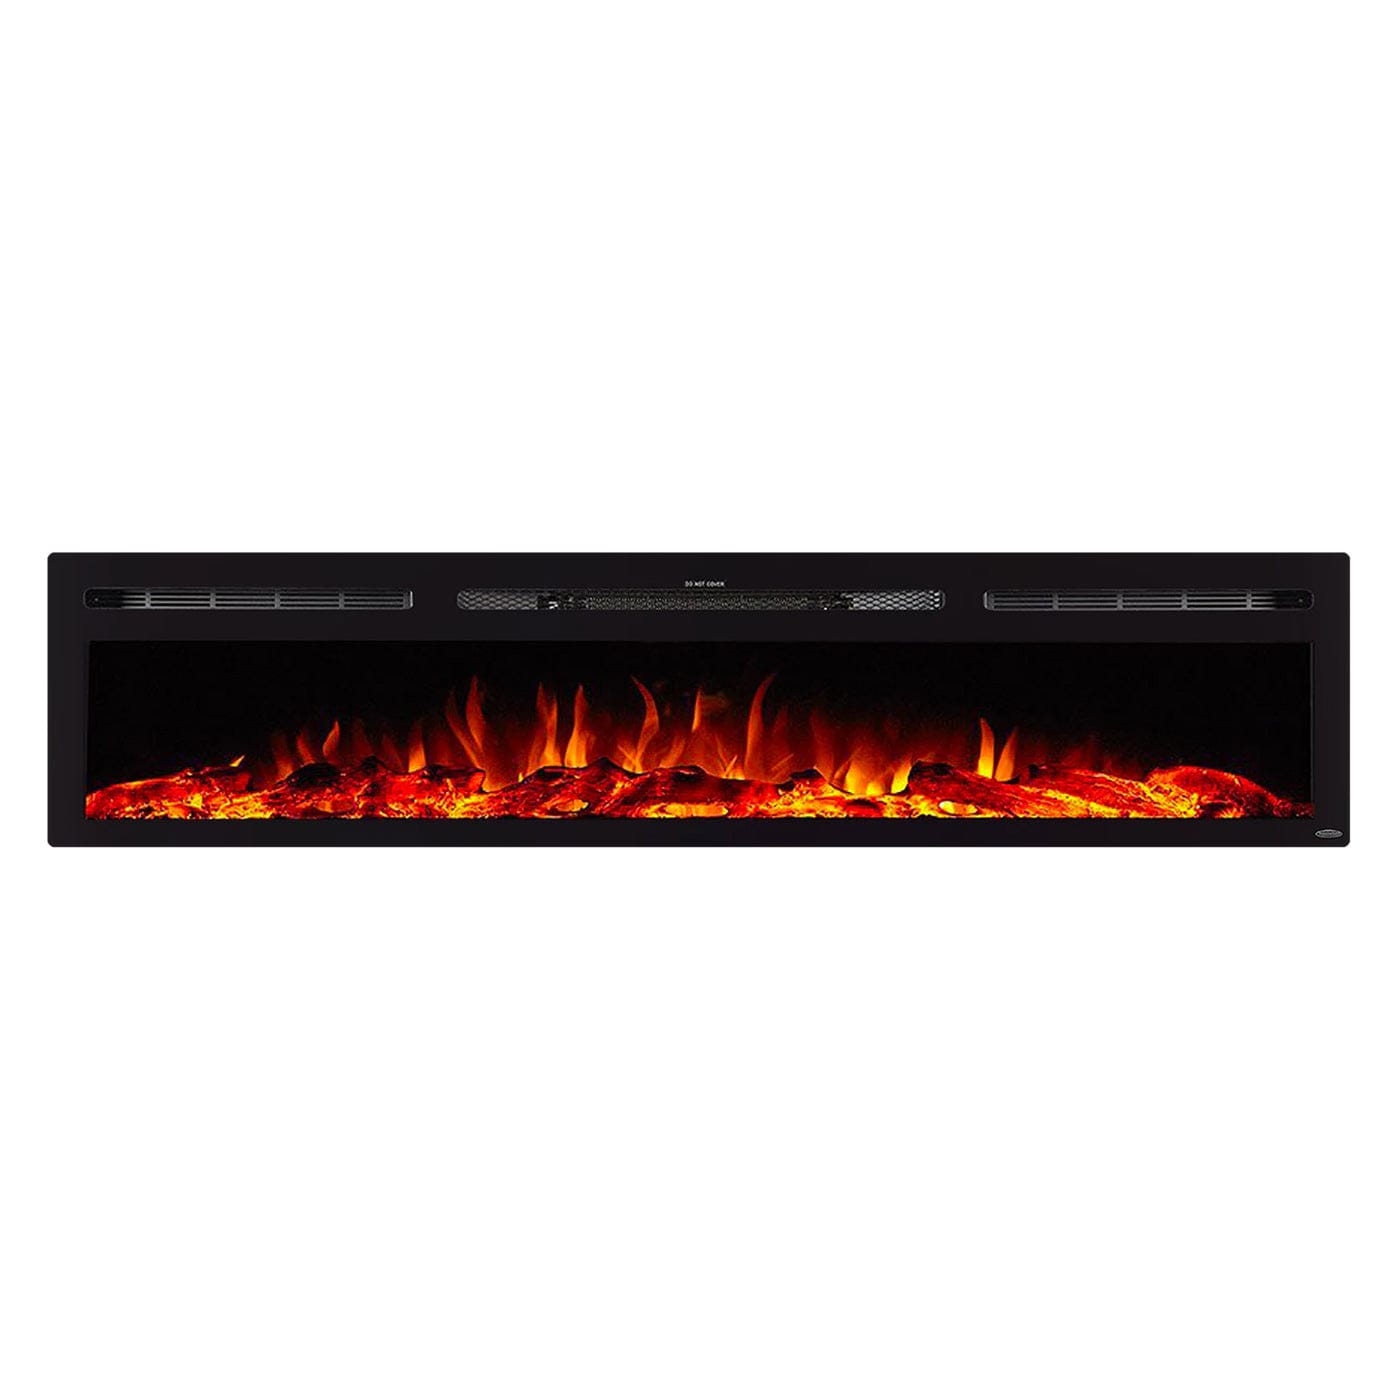 Touchstone Sideline 84 Electric Fireplace front view